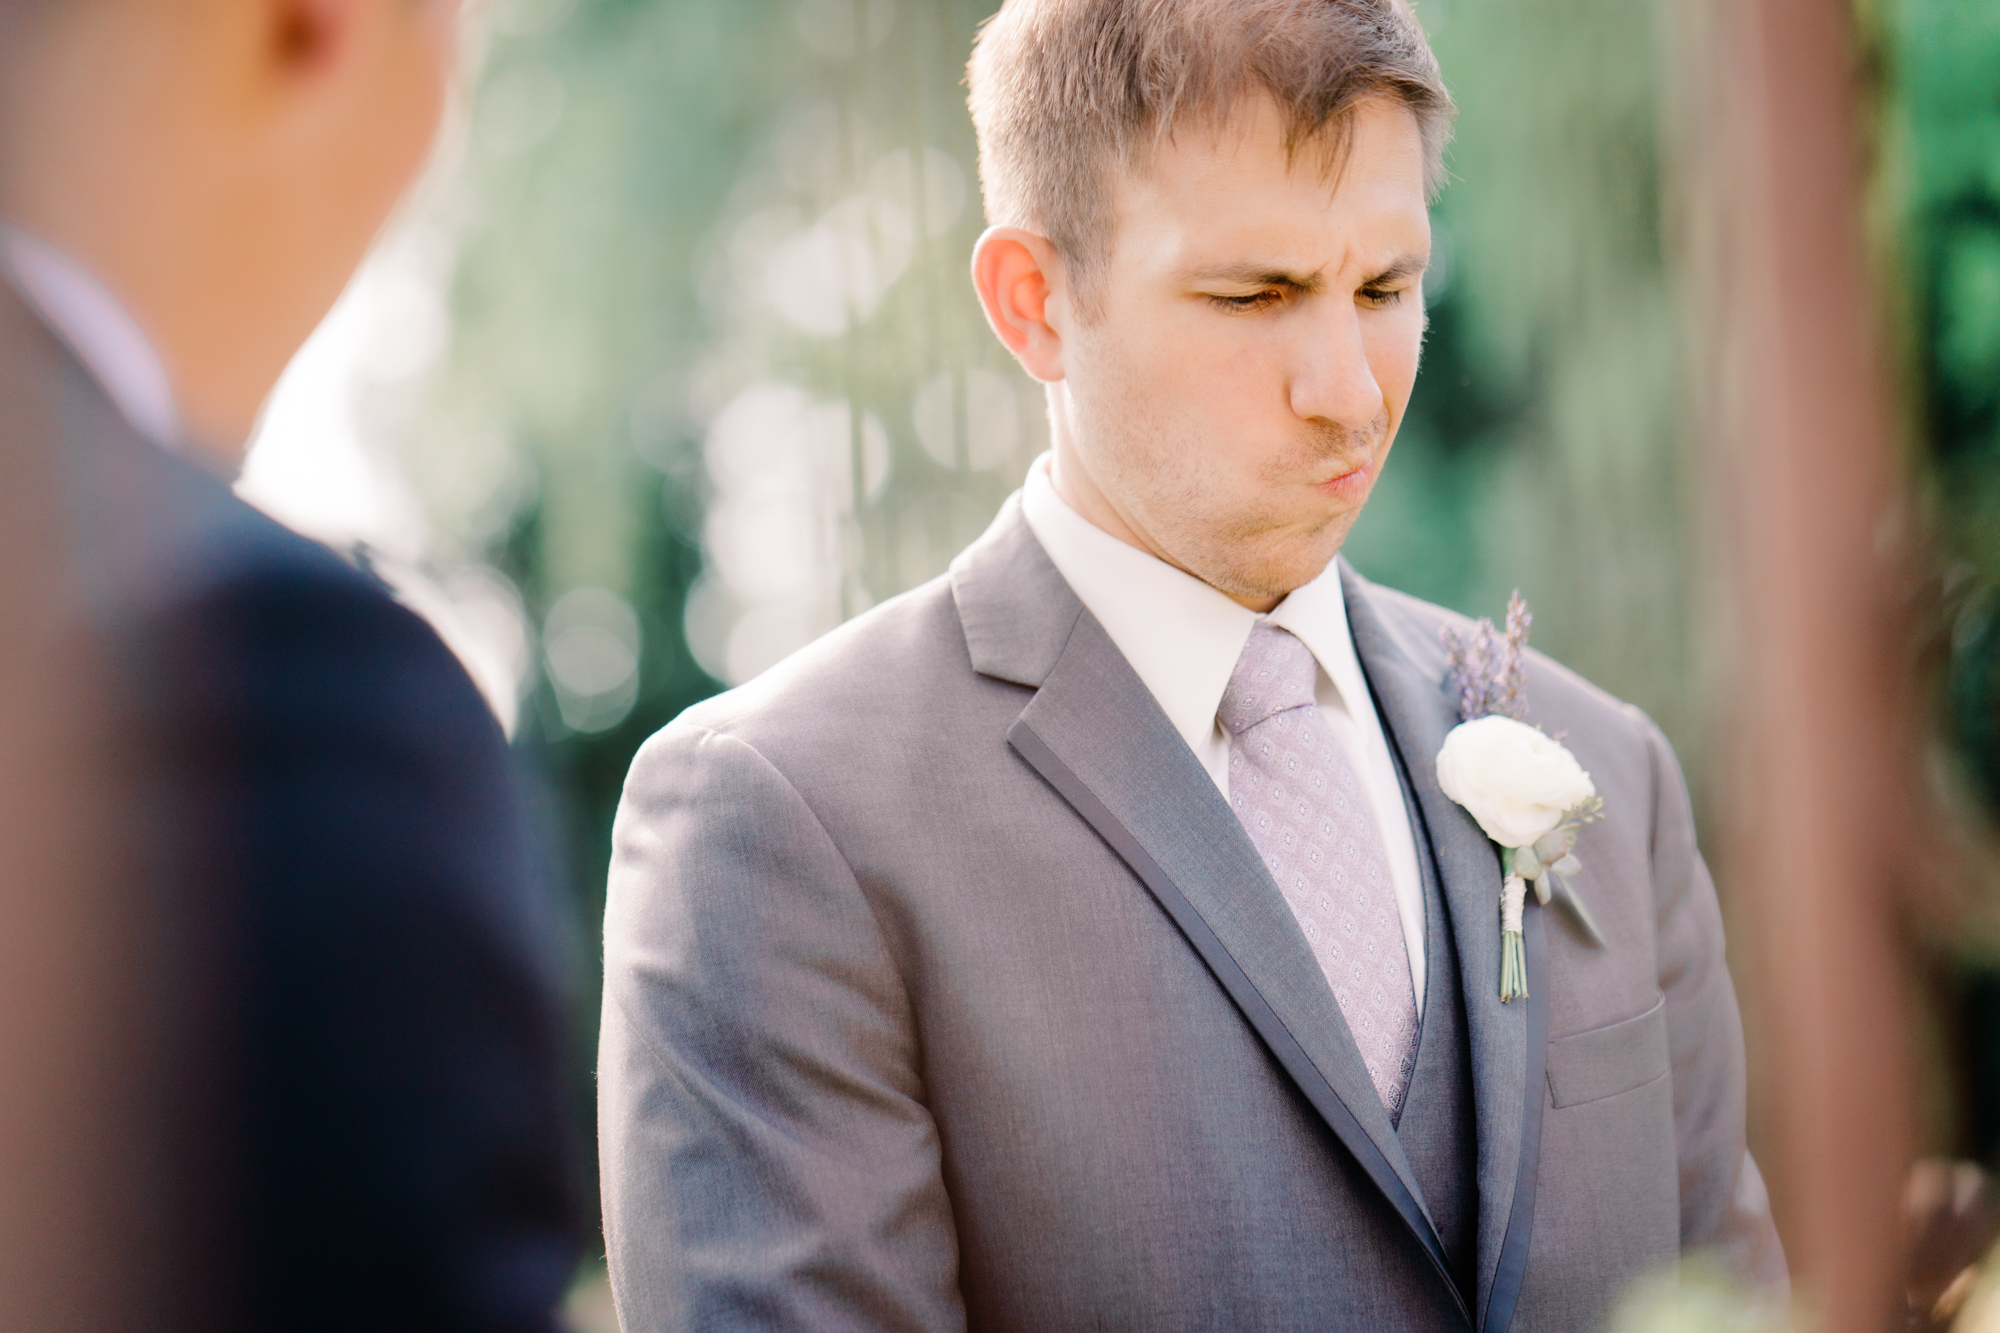 Groom Andres gets emotional during the wedding ceremony.